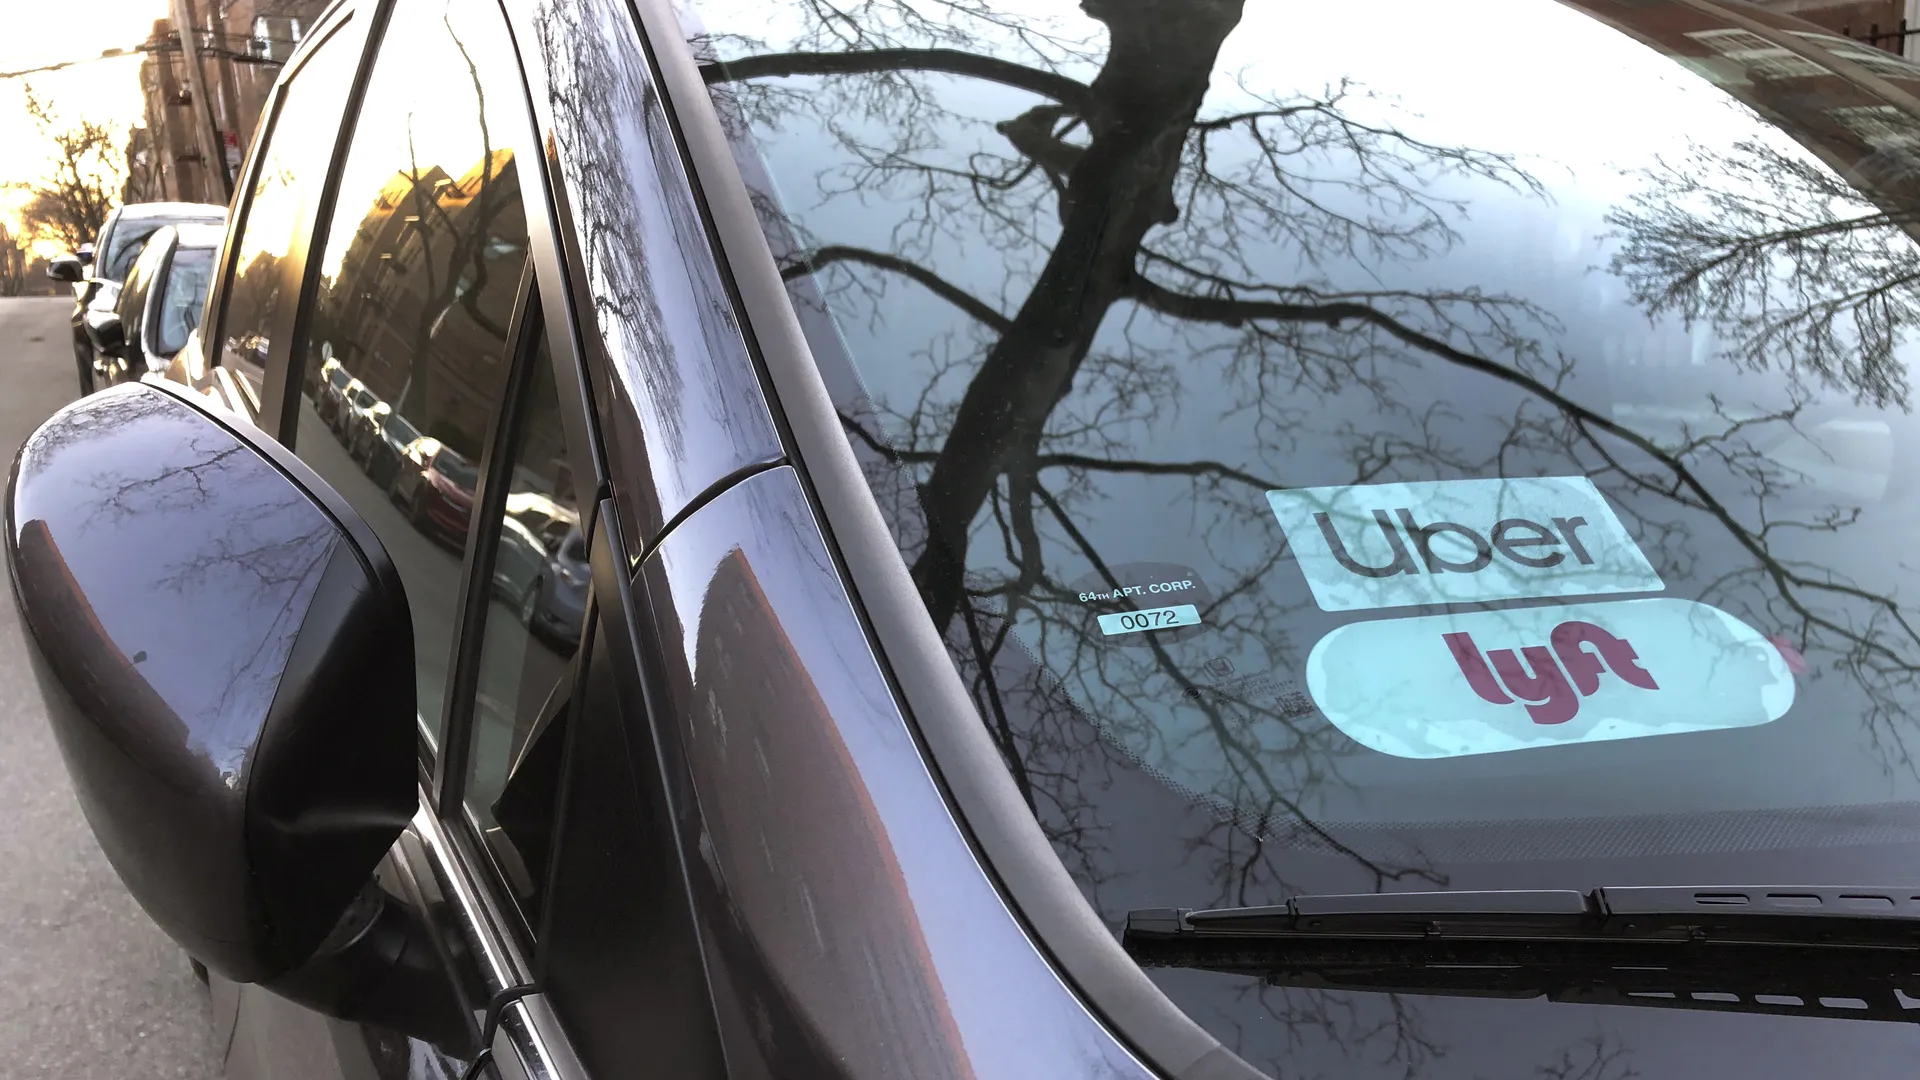 Will Uber and Lyft Say Goodbye Over New Driver Pay Rules at Minneapolis?